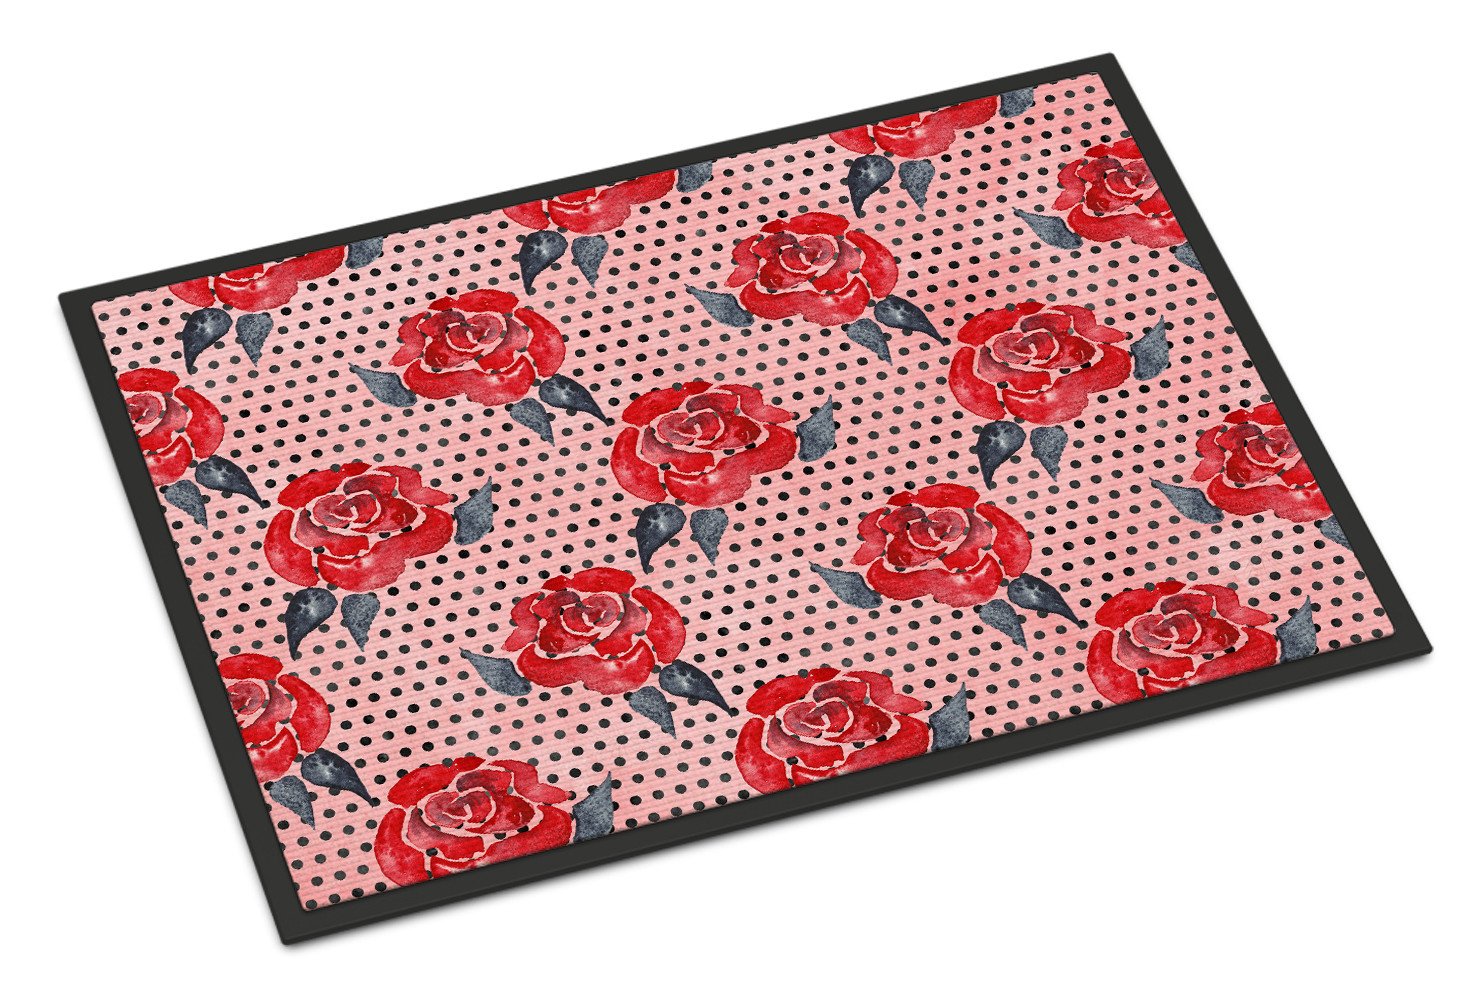 Watercolor Red Roses and Polkadots Indoor or Outdoor Mat 24x36 BB7513JMAT by Caroline's Treasures